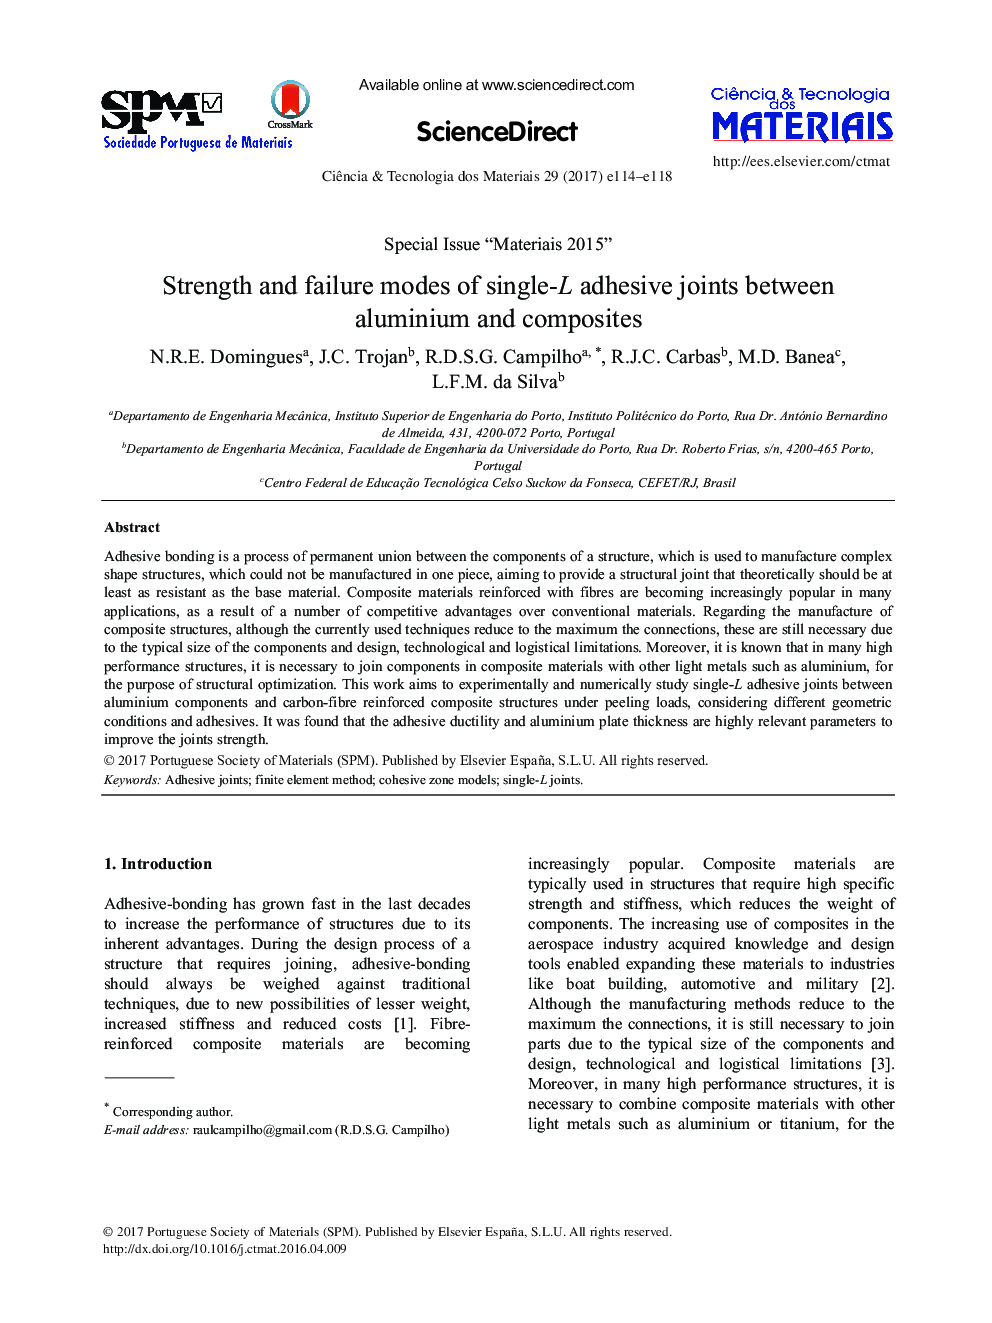 Strength and failure modes of single-L adhesive joints between aluminium and composites